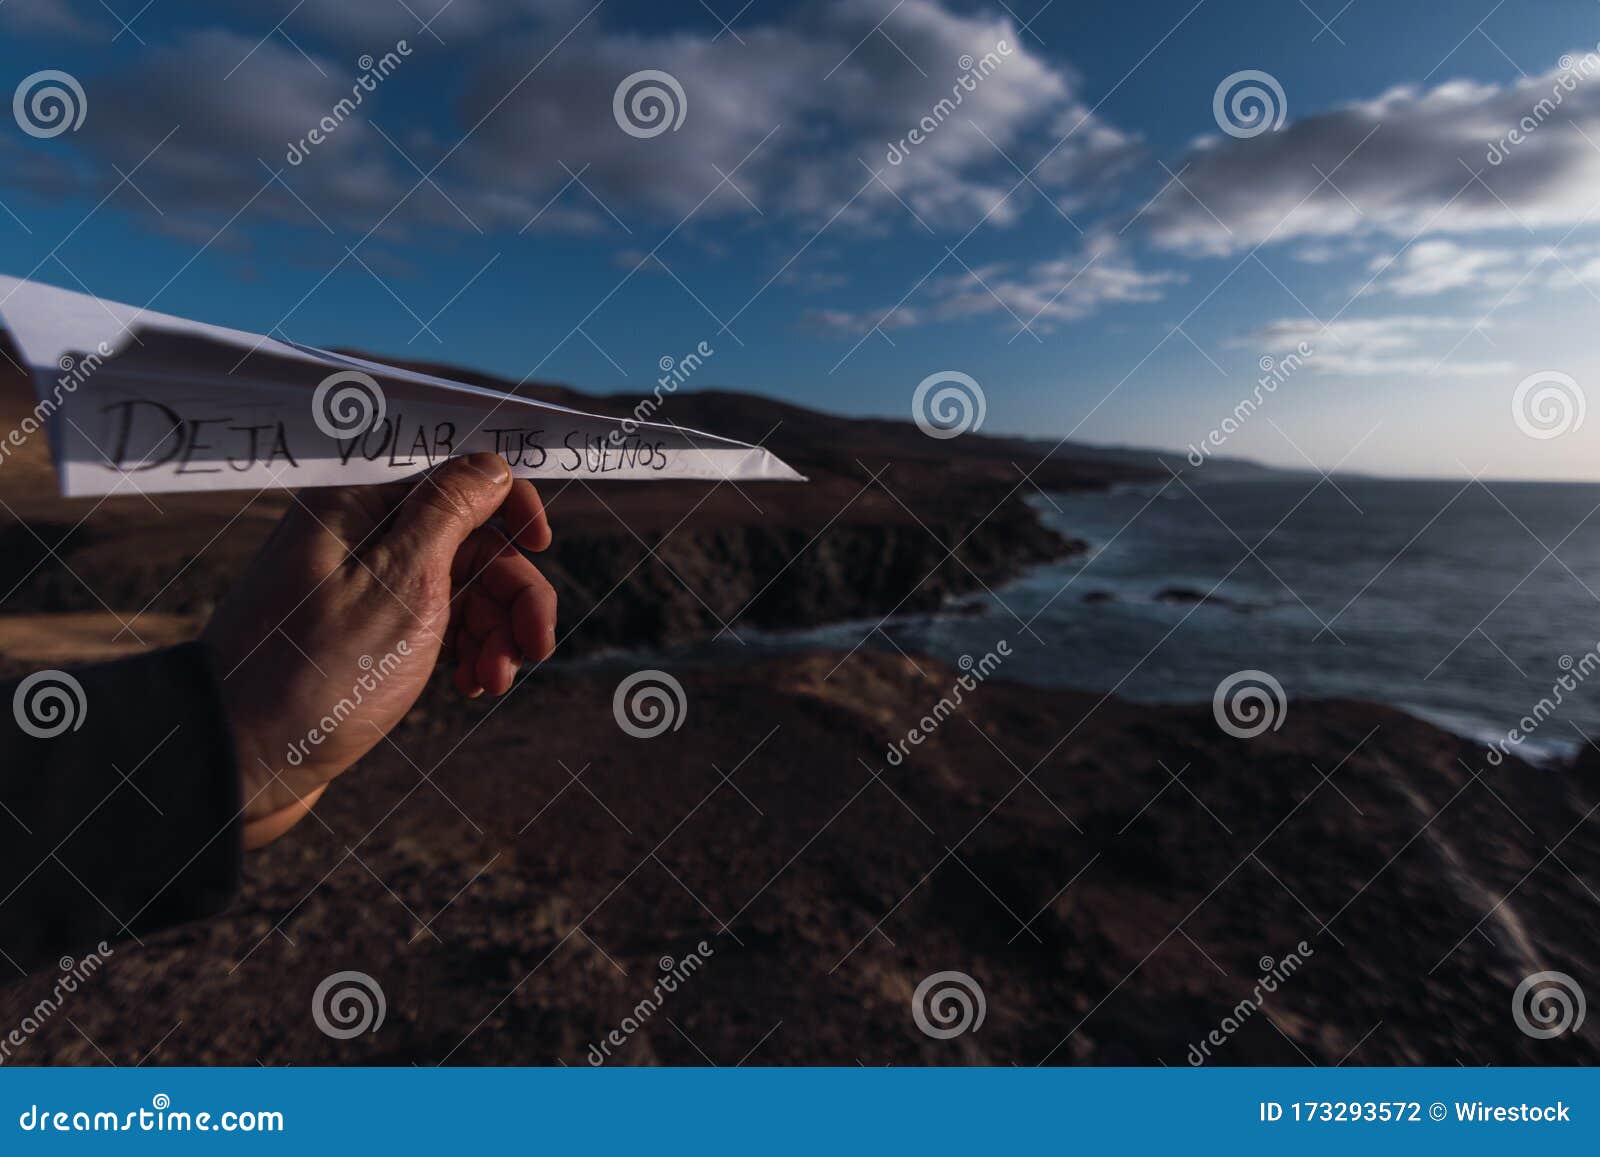 hand holding a paper plane with the words deja volar tus suenos, spanish for let your dreams fly